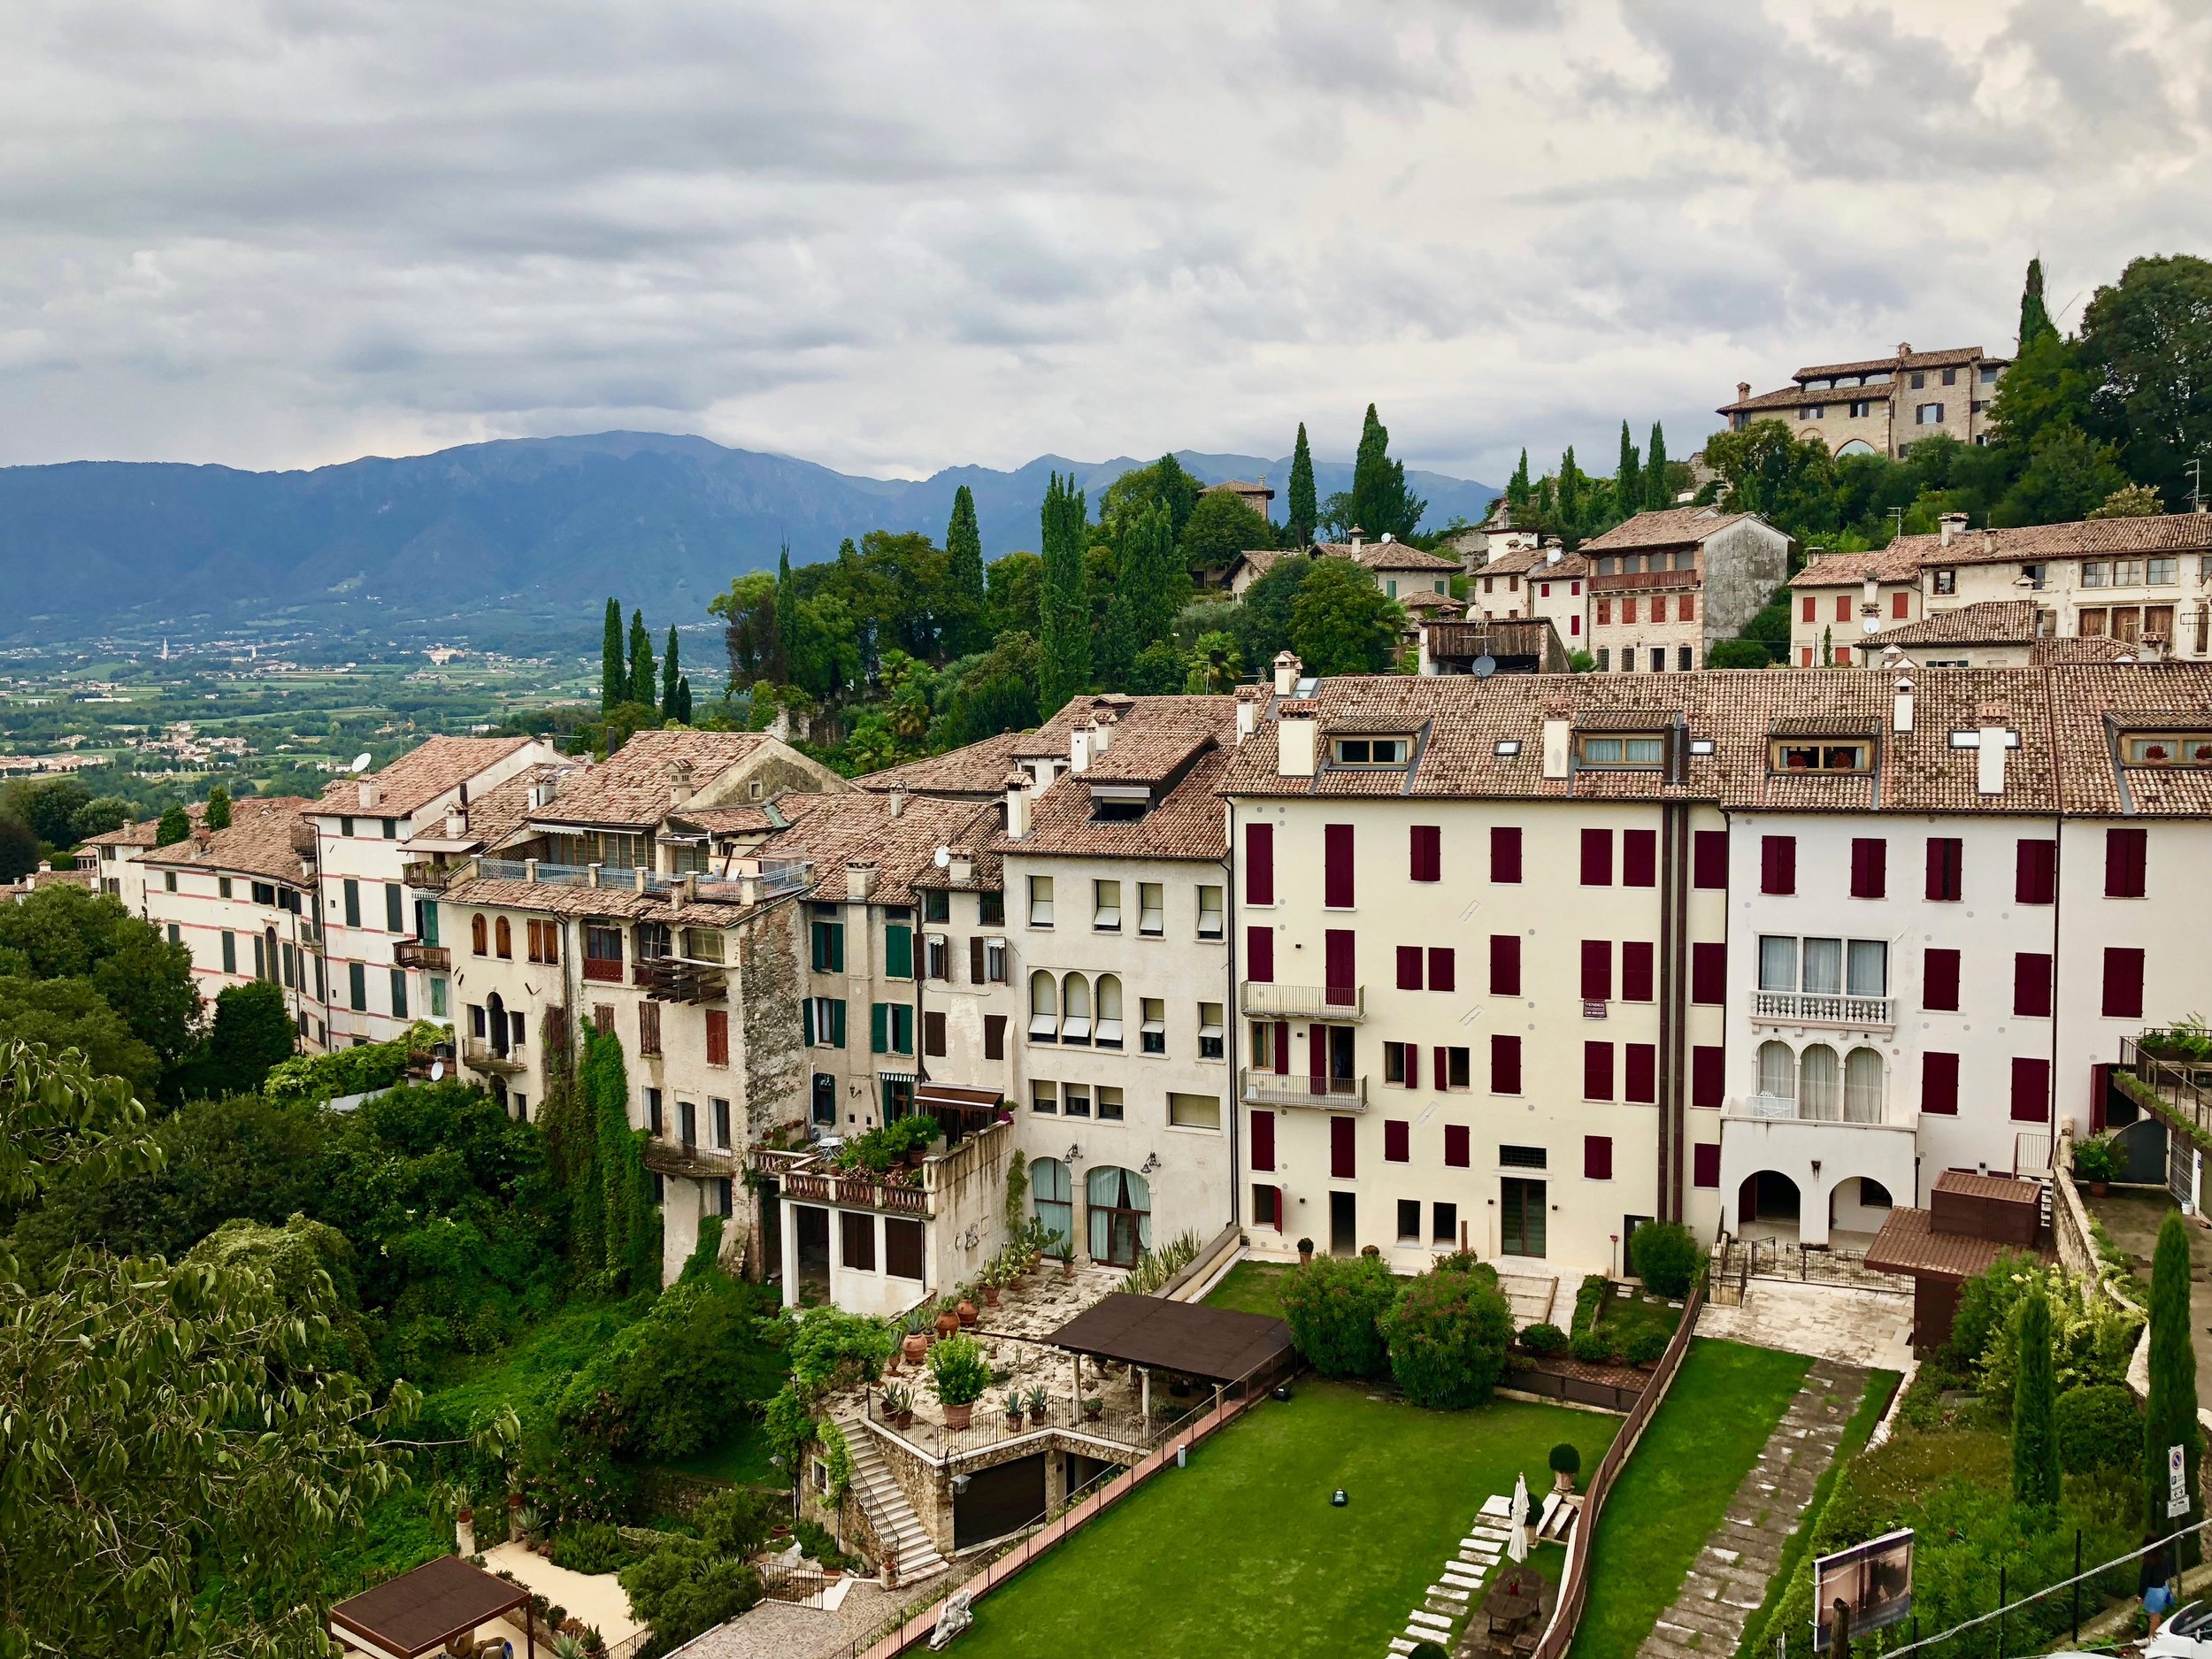 Asolo from the castle tower